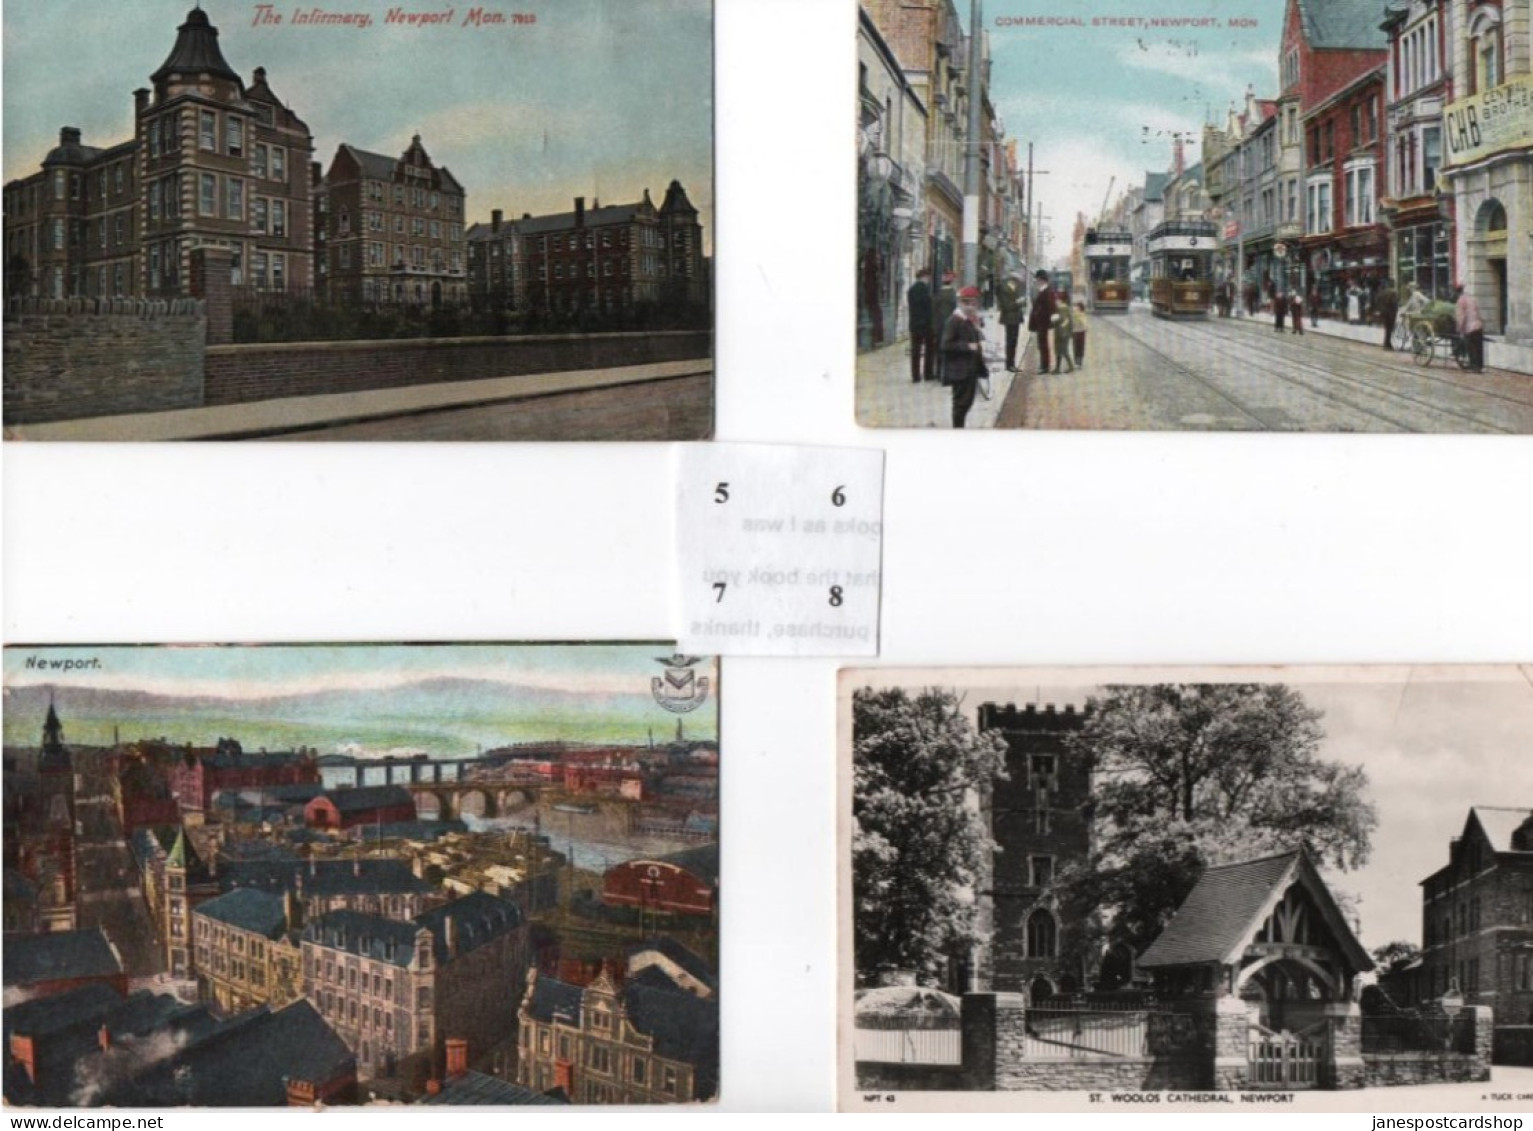 4 POSTCARDS NEWPORT - MONMOUTHSHIRE - THE INFIRMARY - COMMERCIAL STREET - GENERAL VIEW - ST. WOOLOS CATHEDRAL - Monmouthshire